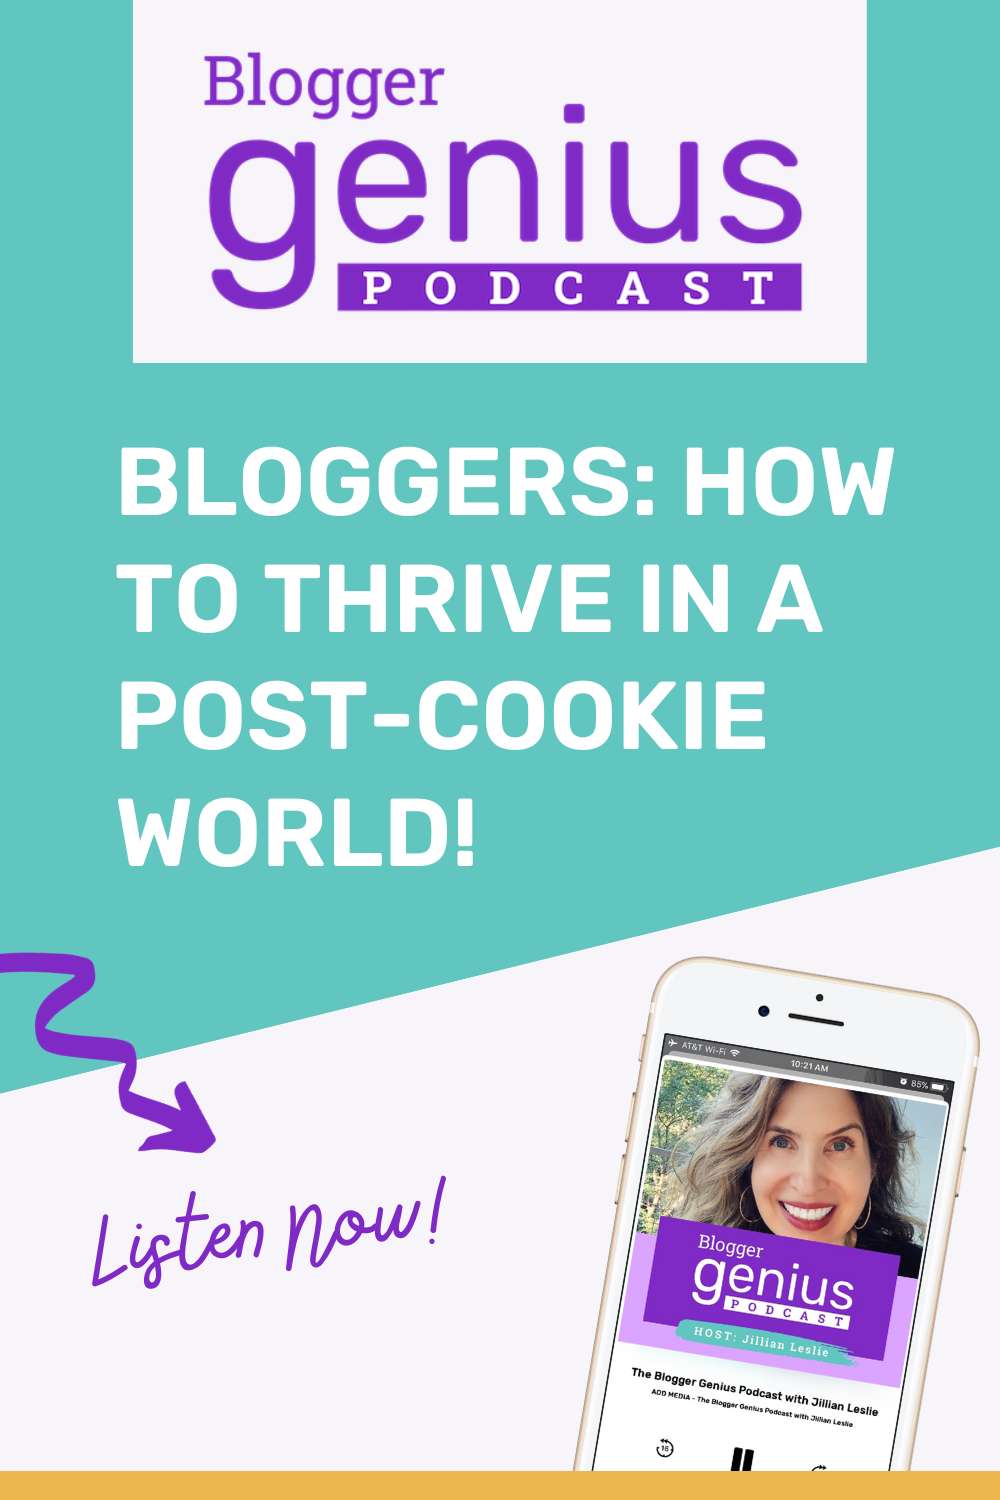 How to Thrive in a Post-Cookie World | The Blogger Genius Podcast with Jillian Leslie